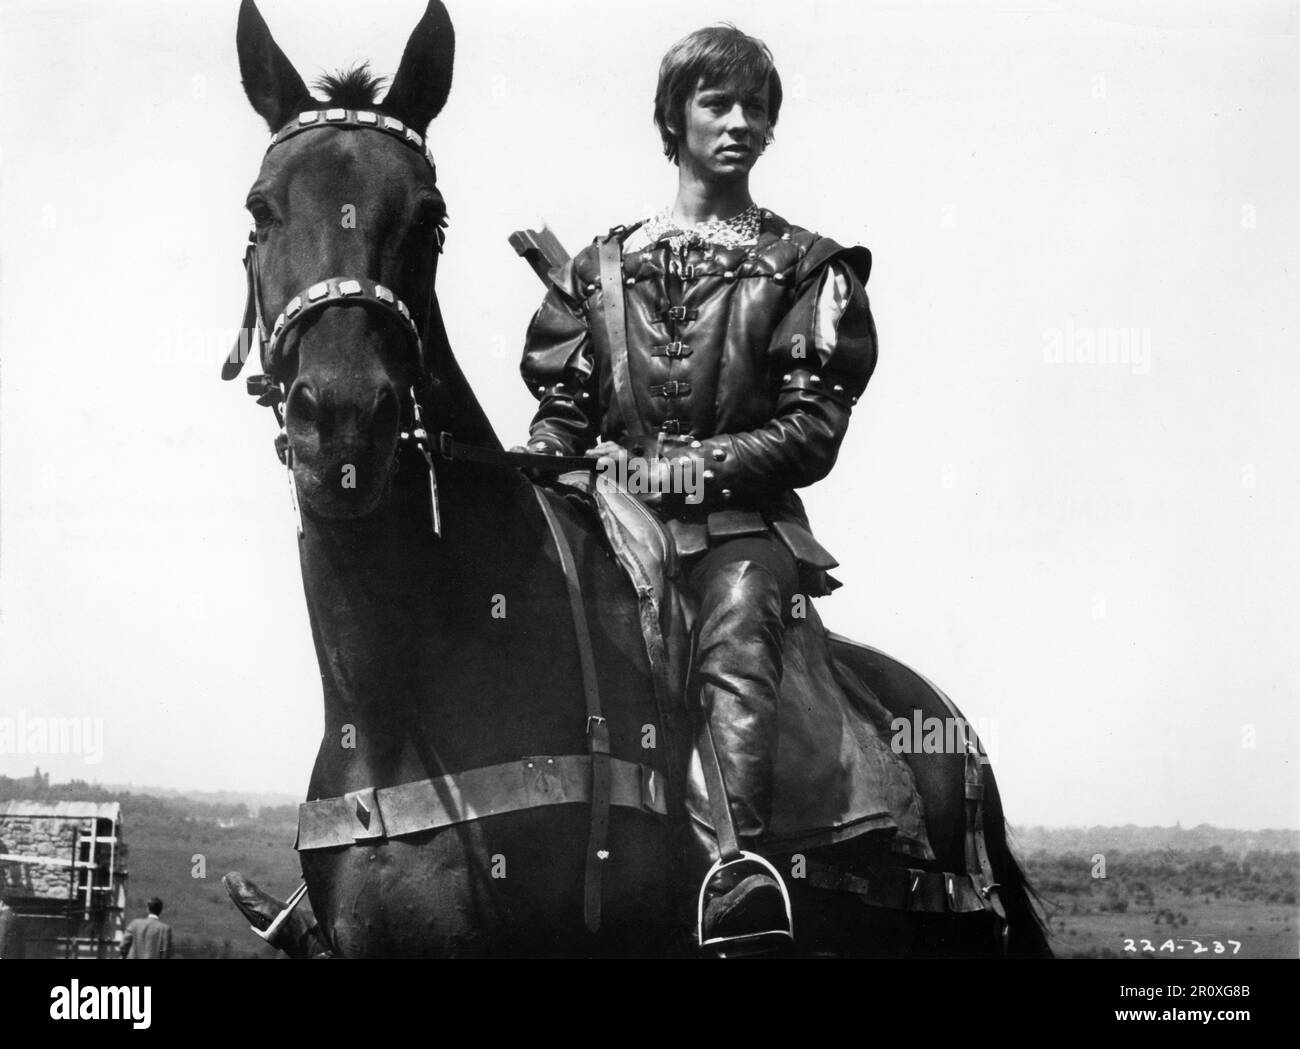 PETER McENERY in THE FIGHTING PRINCE OF DONEGAL 1966 director MICHAEL O'HERLIHY book Robert T. Reilly costume design Anthony Mendleson UK-USA co-production Walt Disney Productions Stock Photo